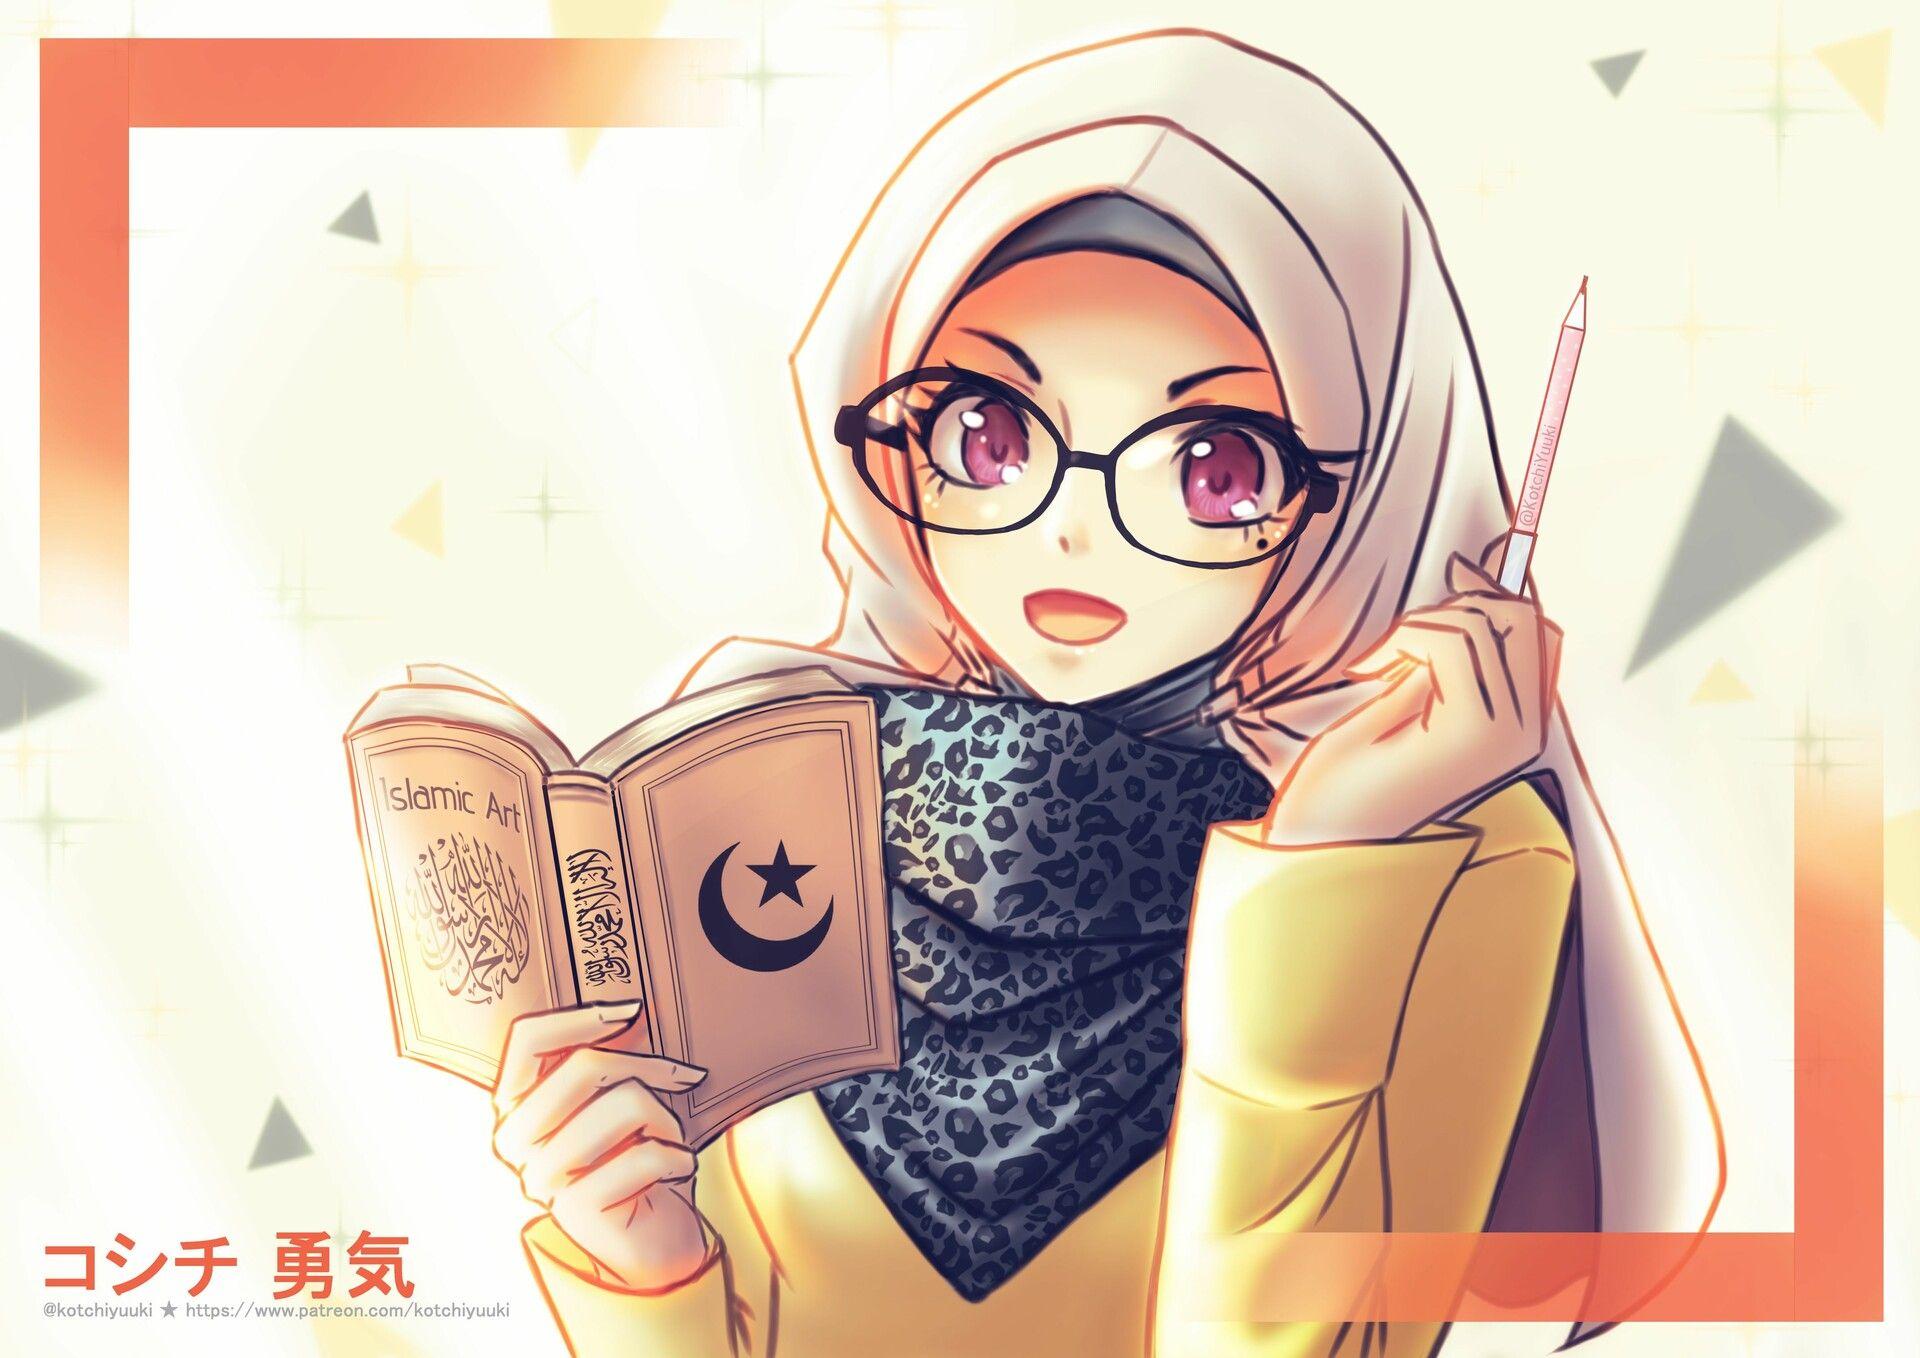 Islamic Girls Drawing Anime Wallpapers - Wallpaper Cave